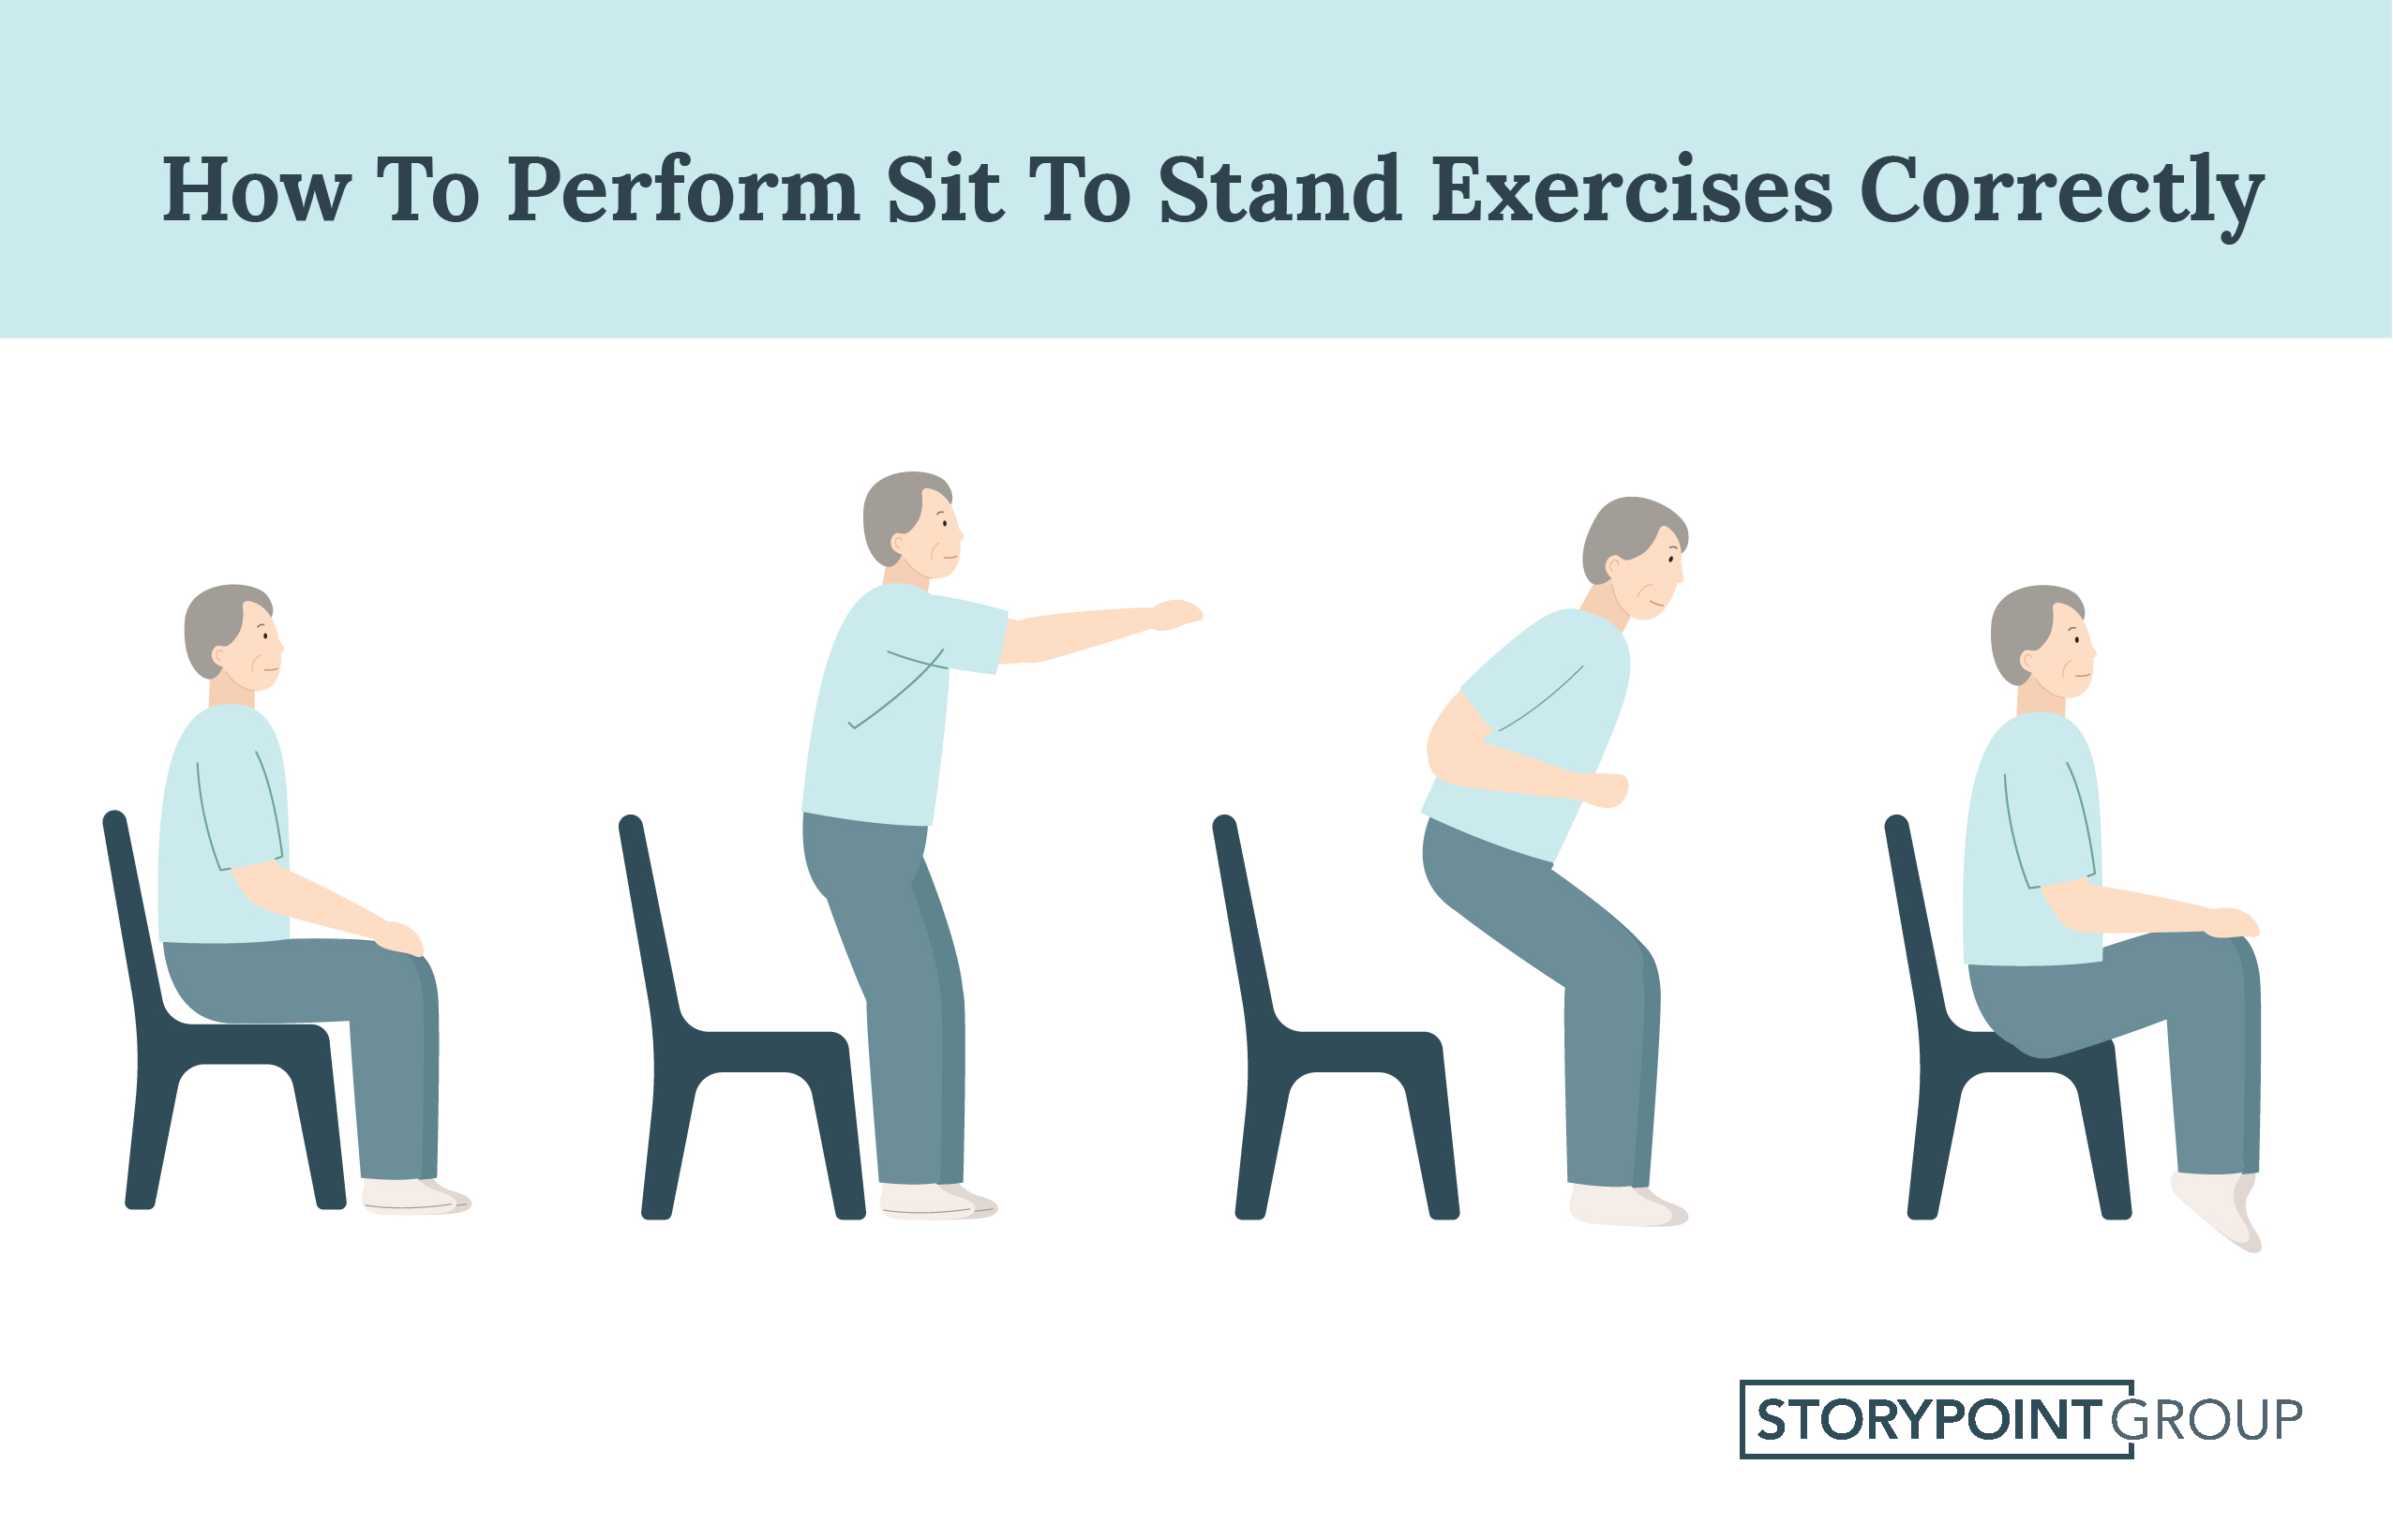 Sit To Stand Exercise Guide: How To Increase Mobility